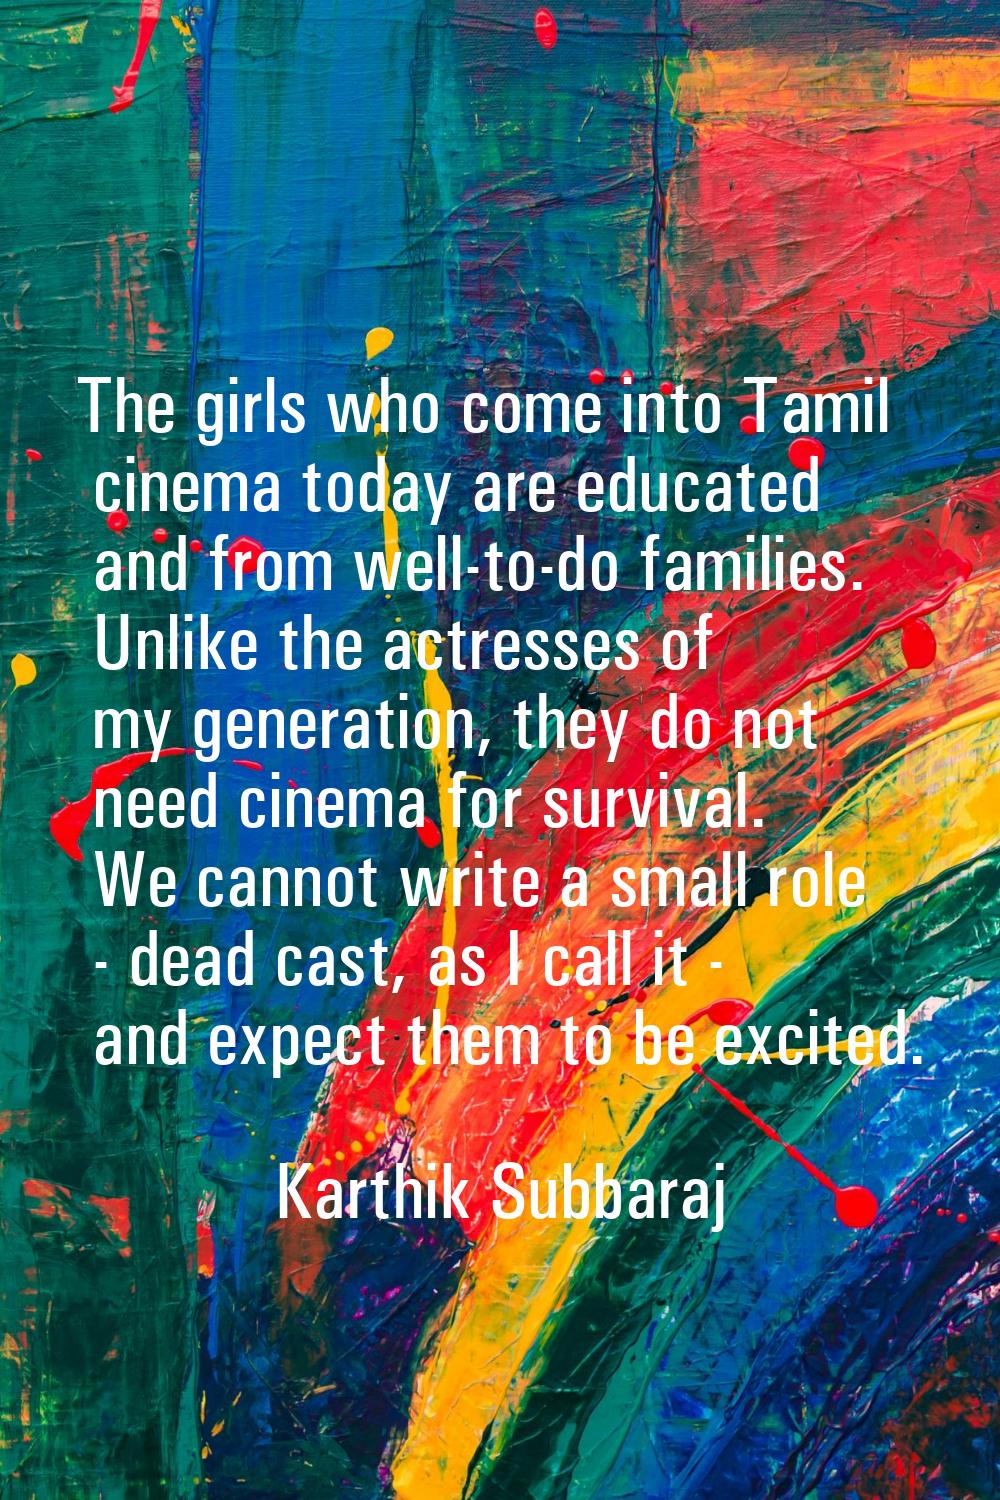 The girls who come into Tamil cinema today are educated and from well-to-do families. Unlike the ac